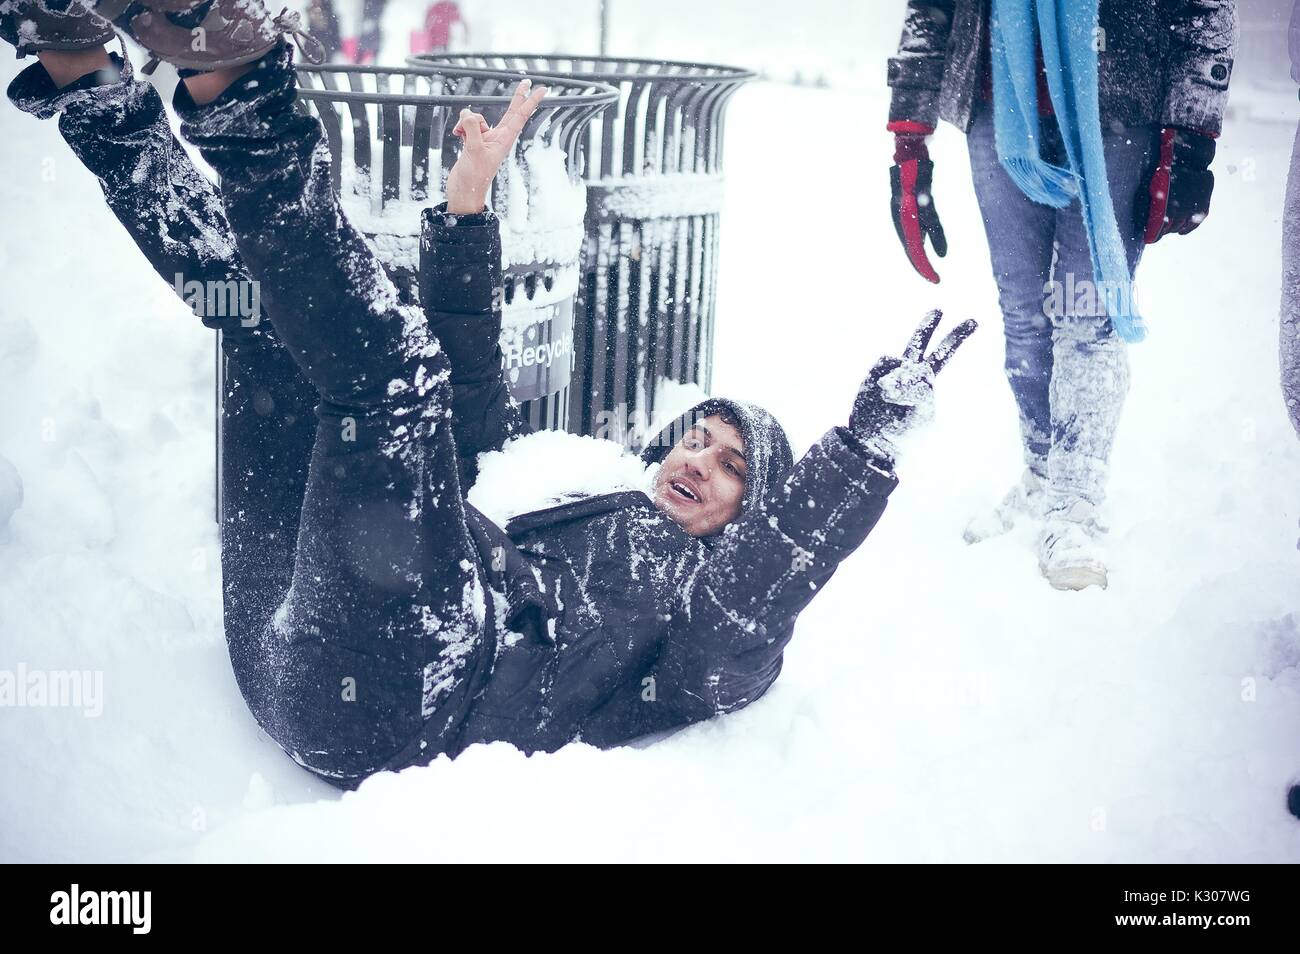 A student smiles and sits in the snow on his back with arms and legs in the air after having slid down the snowy stairs during a snow day at Johns Hopkins University, Baltimore, Maryland, 2016. Stock Photo